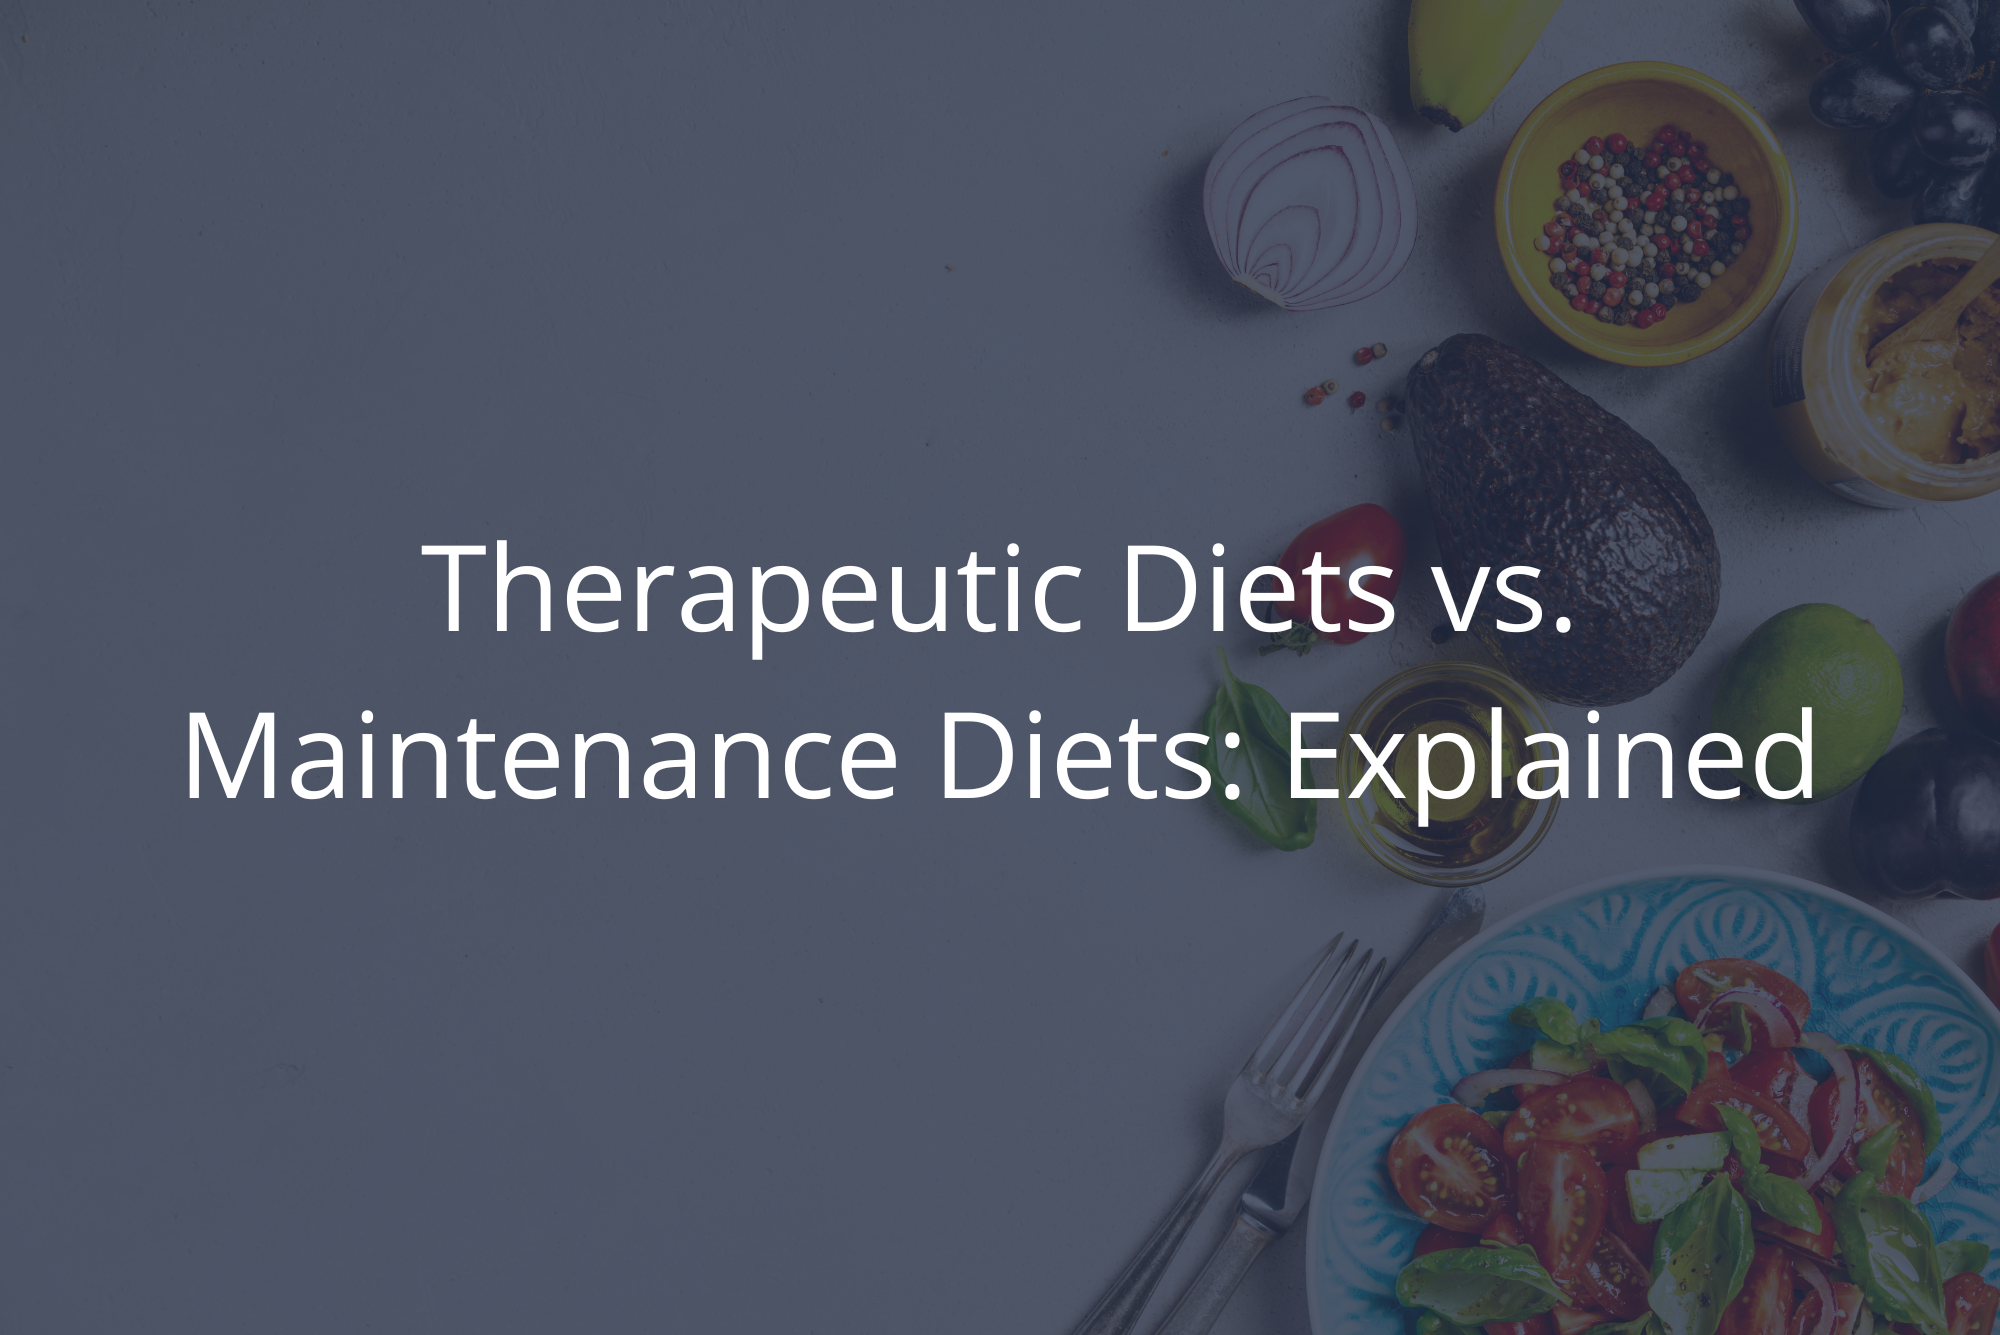 Healthy foods are spread across a stone countertop representing the difference between therapeutic and maintenance diets.